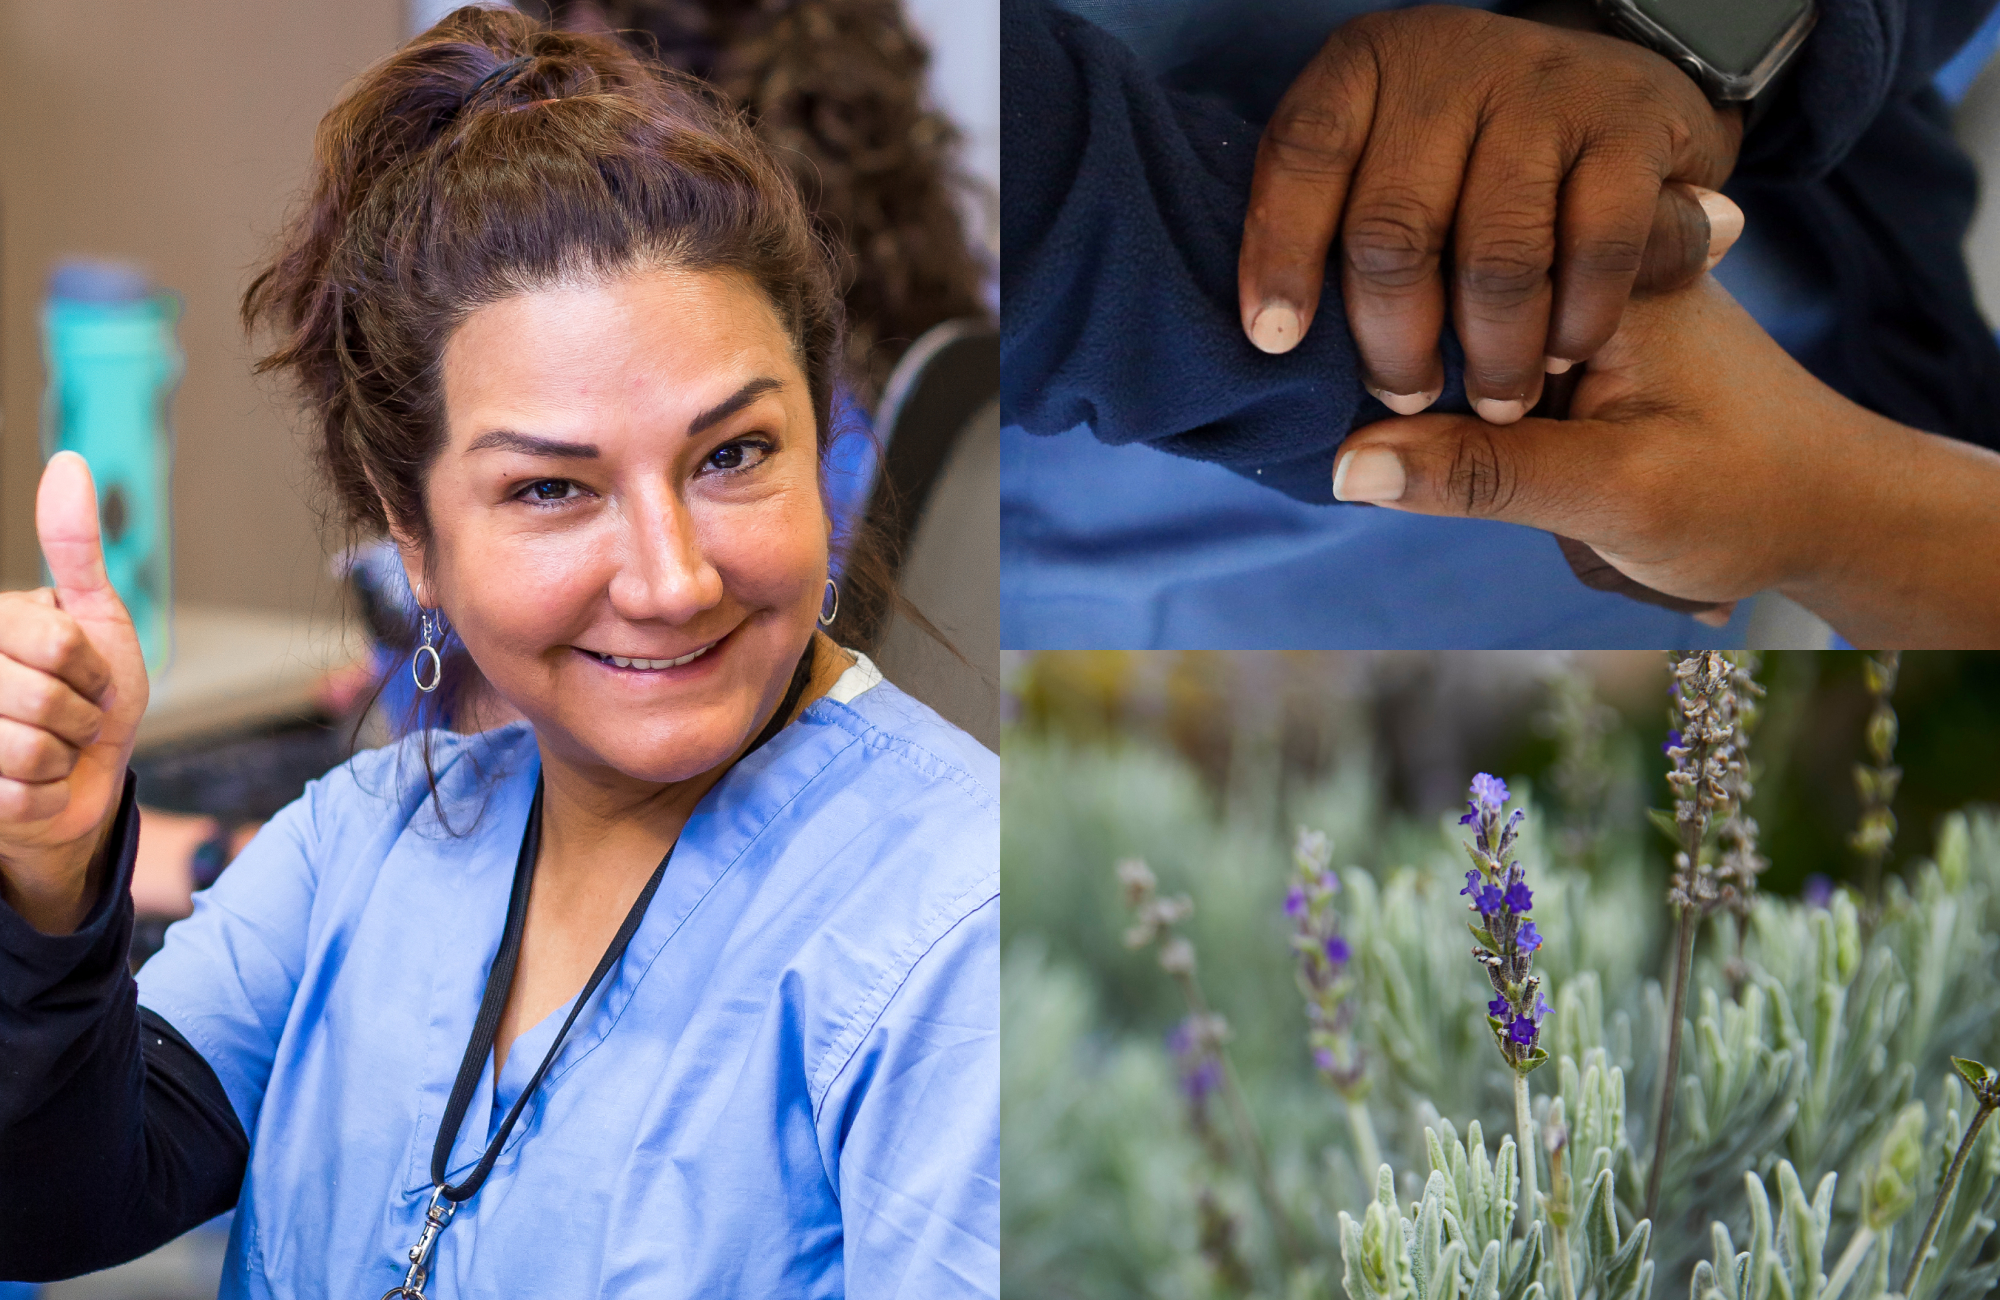 Collage of female in scrubs giving thumbs up, close up of hands holding and closeup of lavender